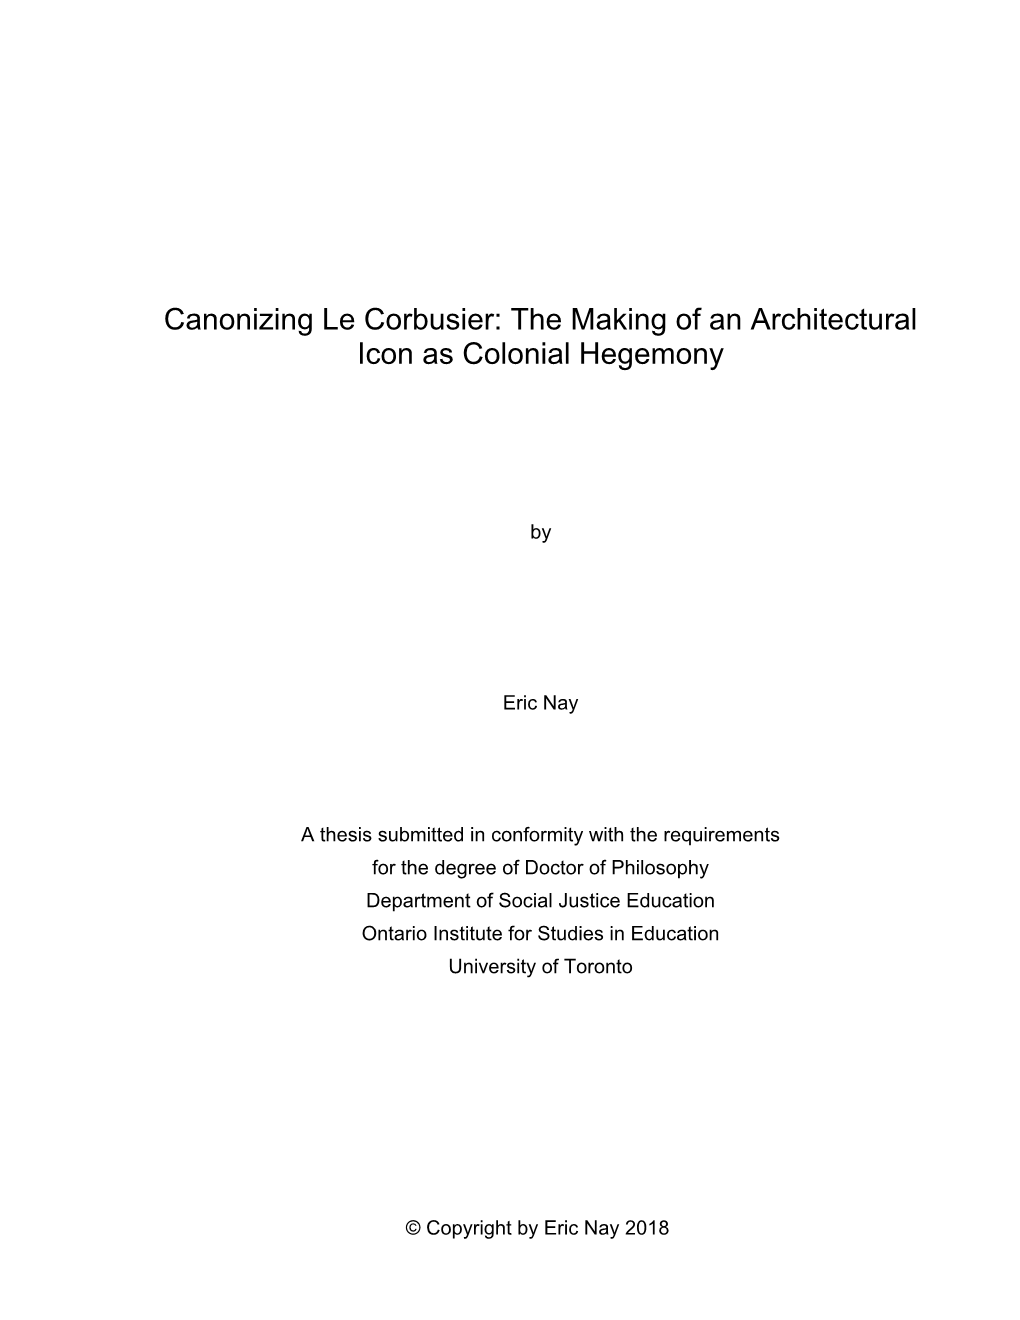 Canonizing Le Corbusier: the Making of an Architectural Icon As Colonial Hegemony